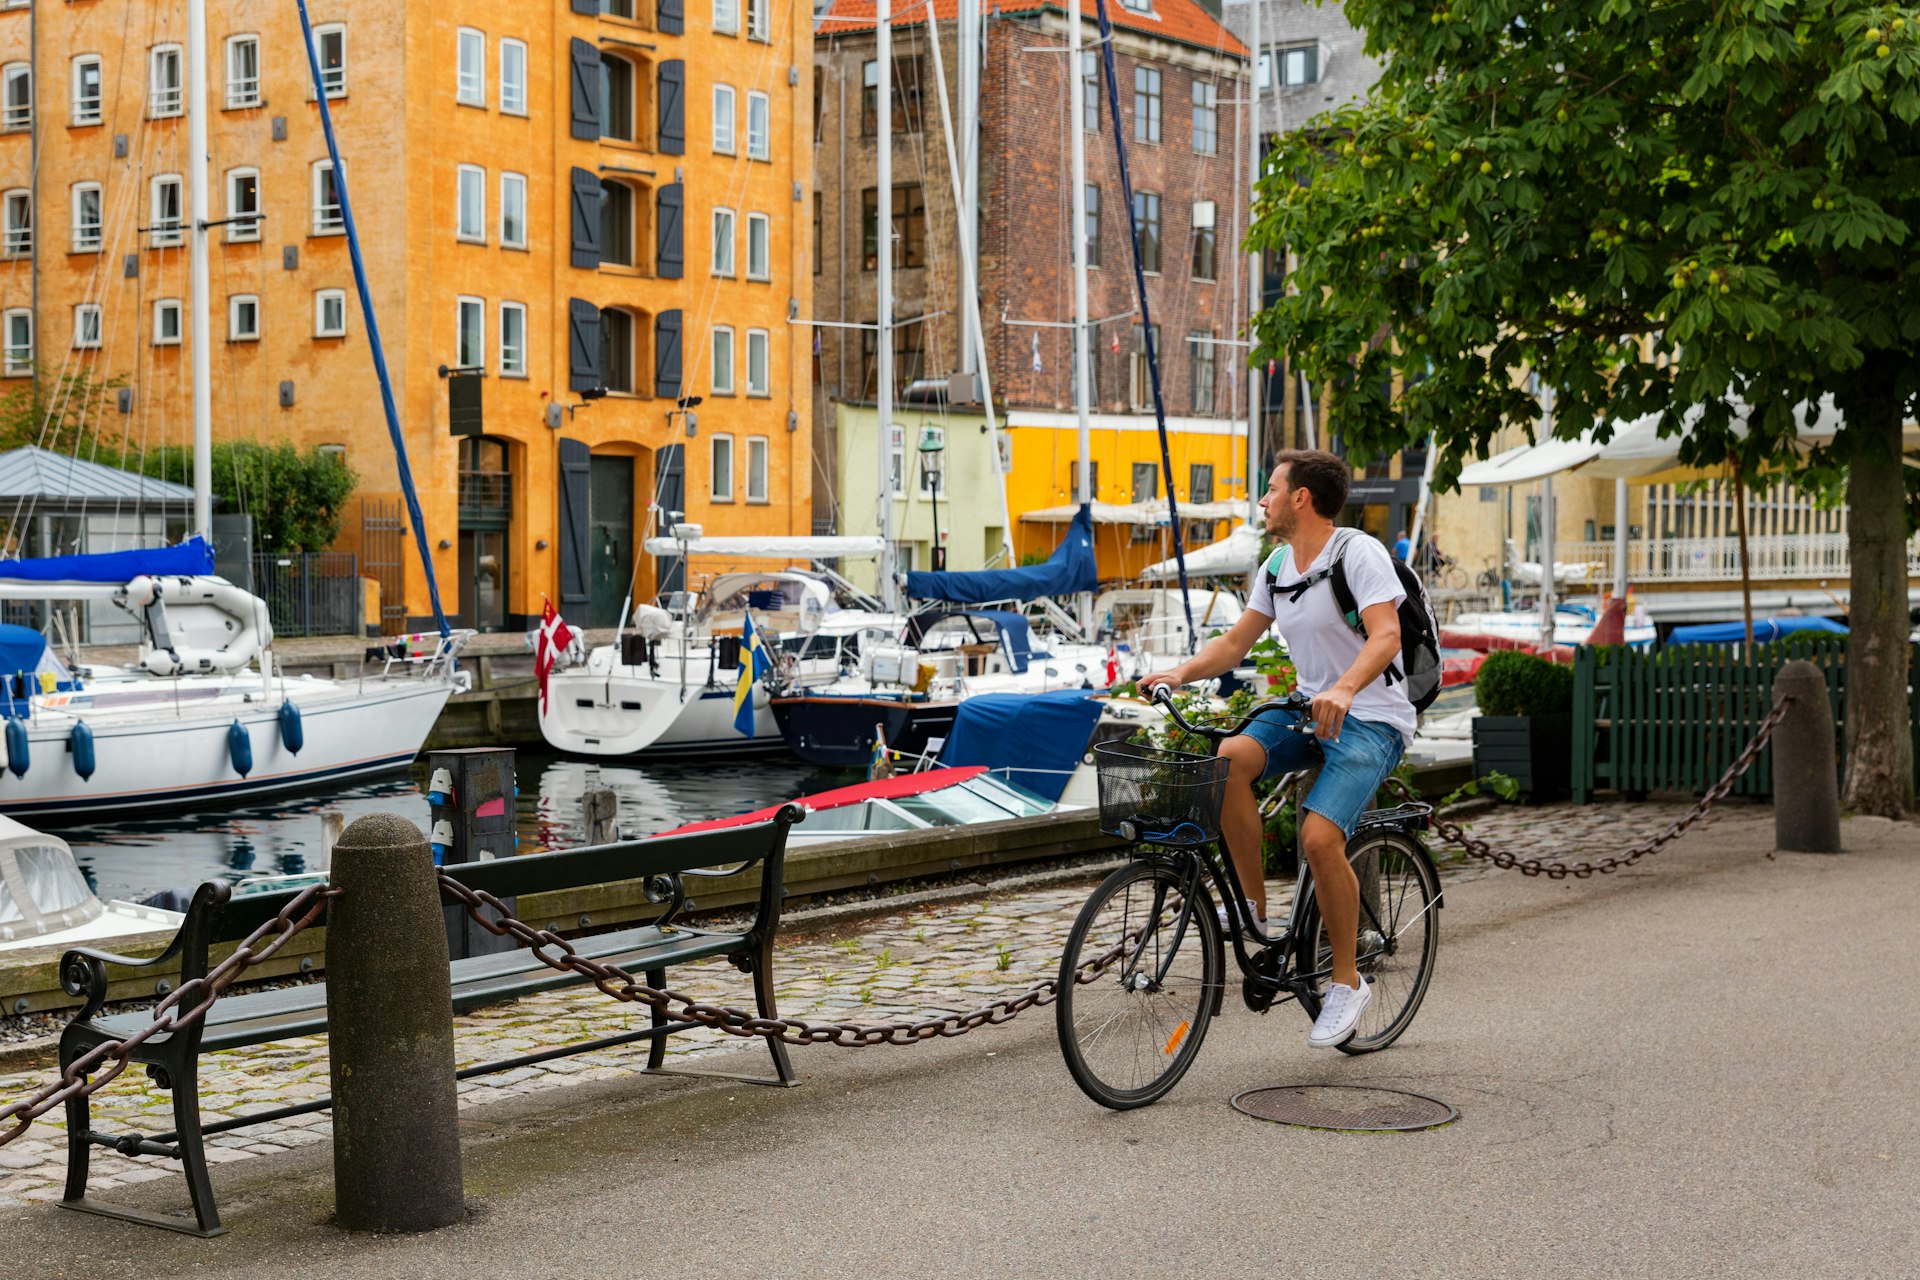 A cyclist passes a canal lined with small boats.